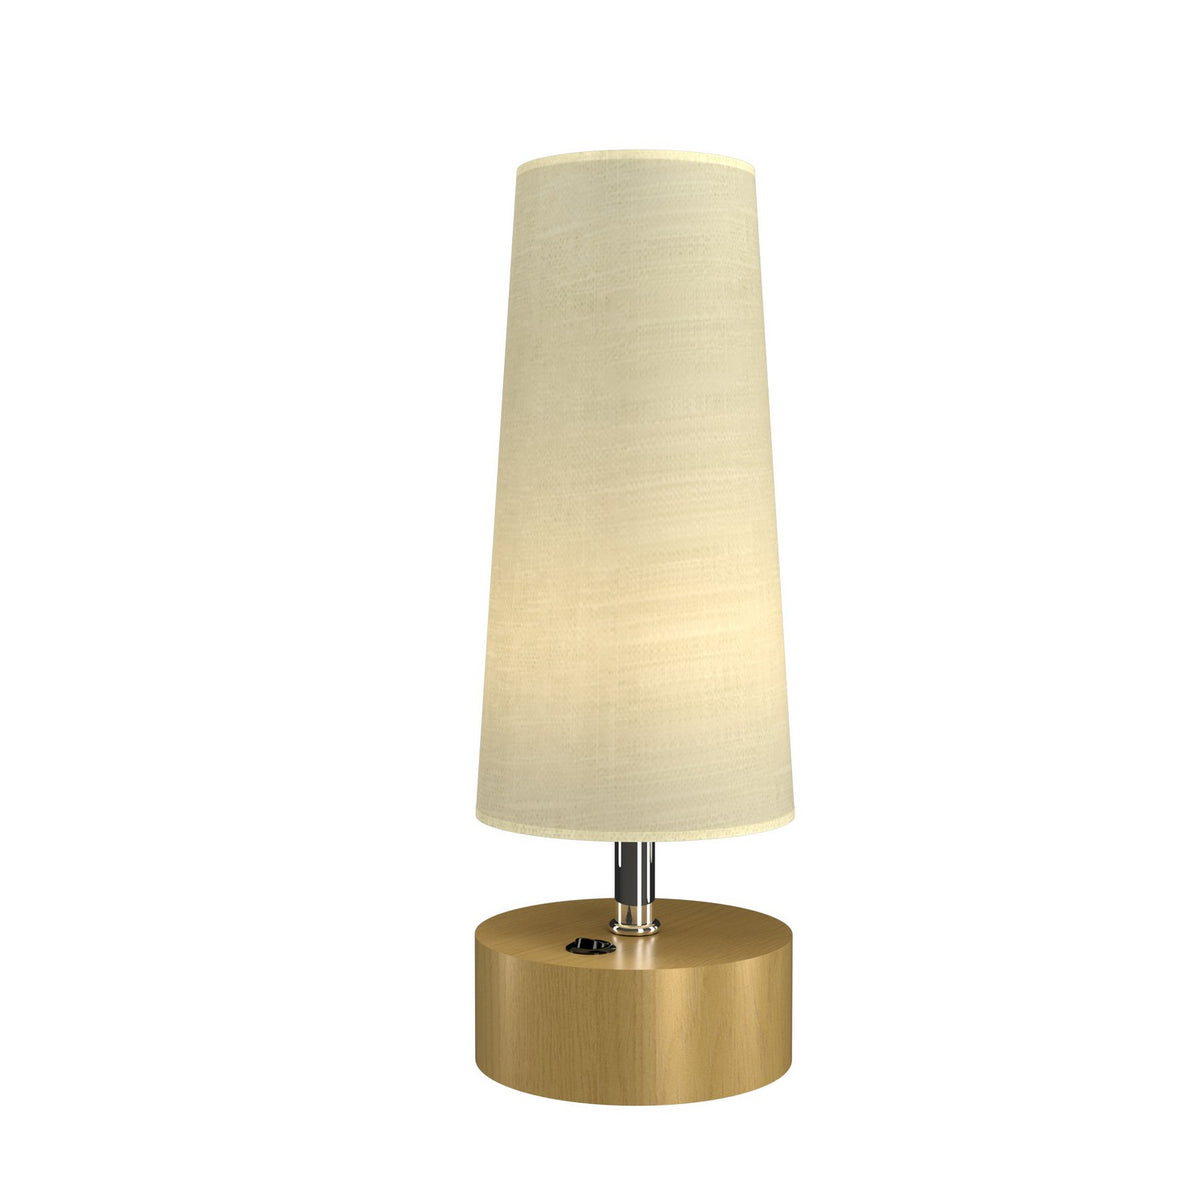 Accord Lighting - 7101.49 - LED Table Lamp - Clean - Organic Gold